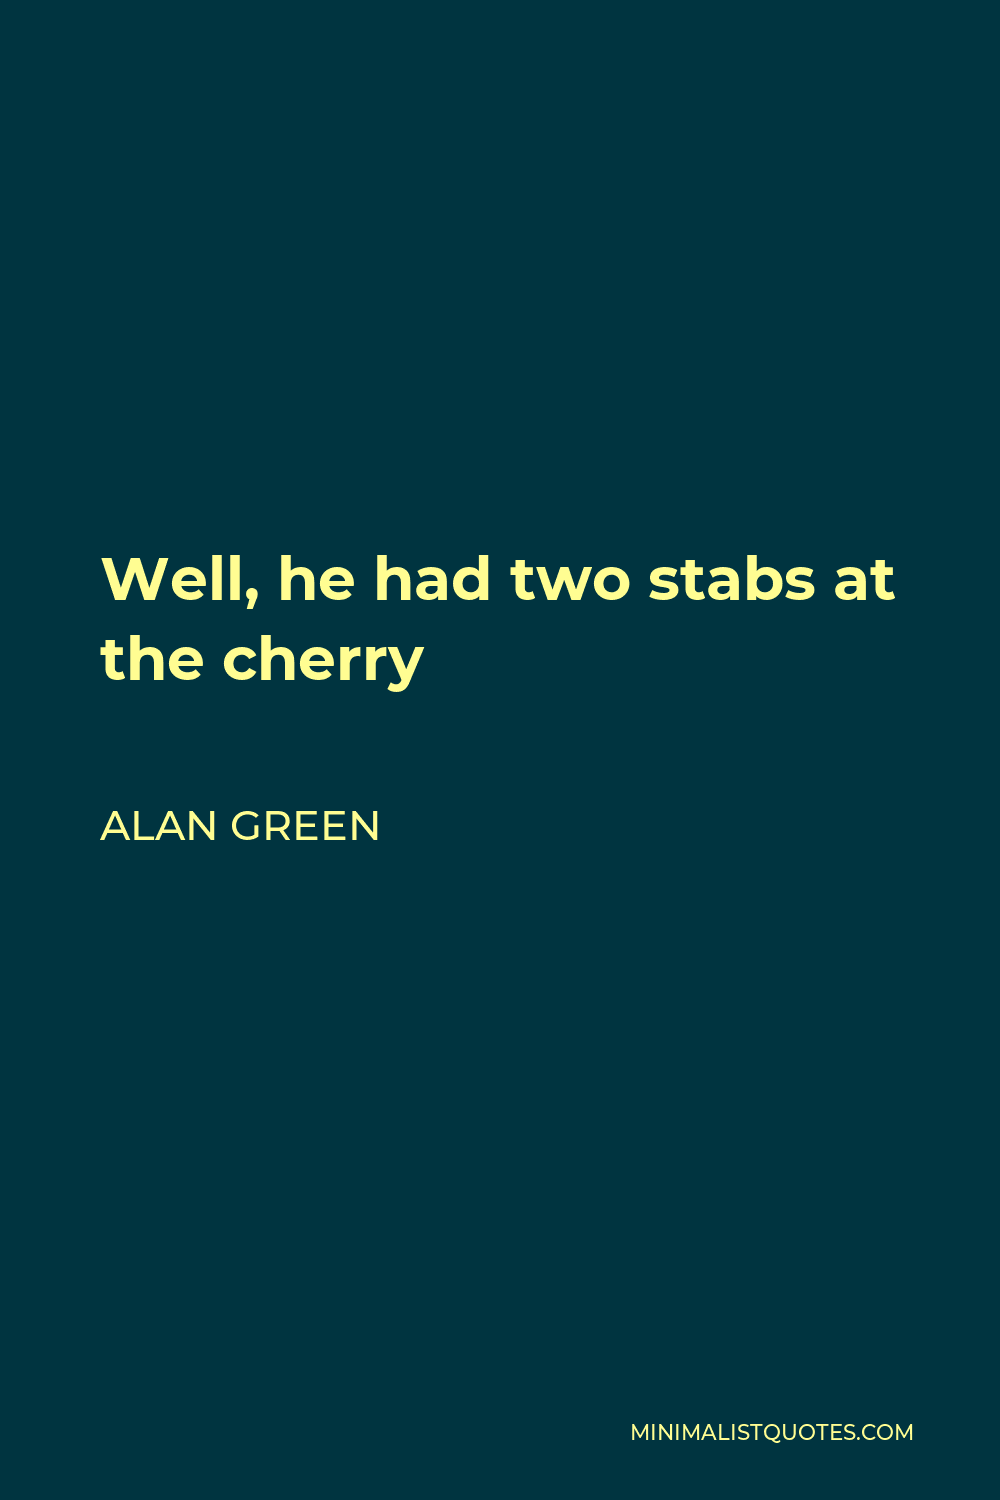 Alan Green Quote - Well, he had two stabs at the cherry